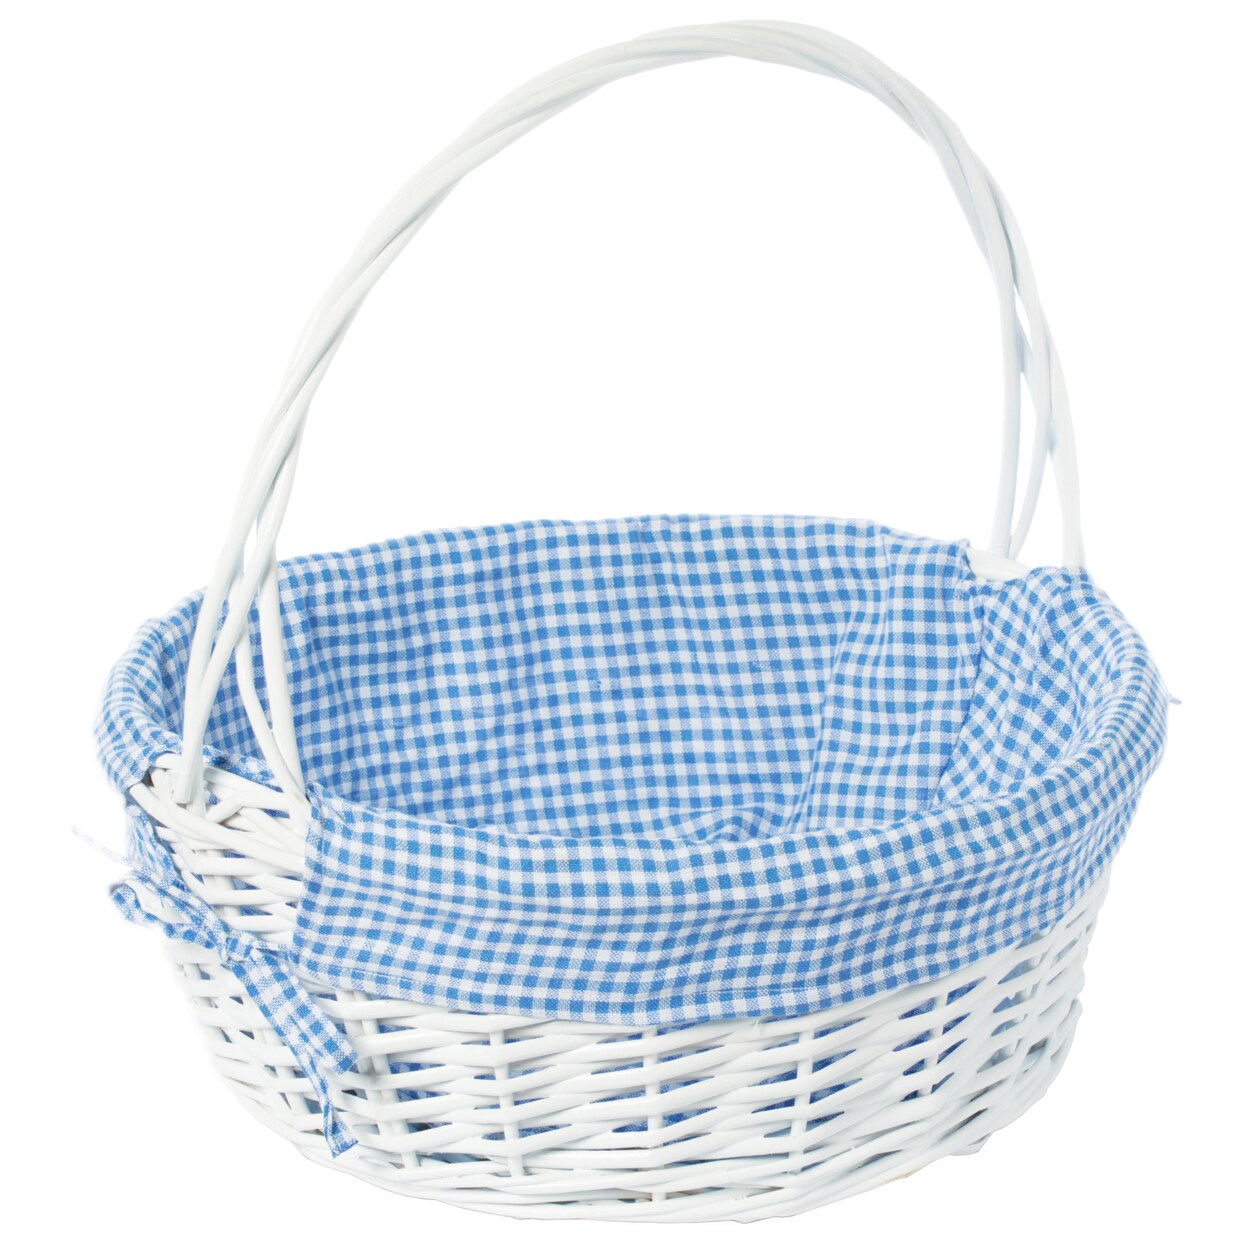 Wickerwise White Round Willow Gift Basket with Blue and White Gingham Liner and Handles